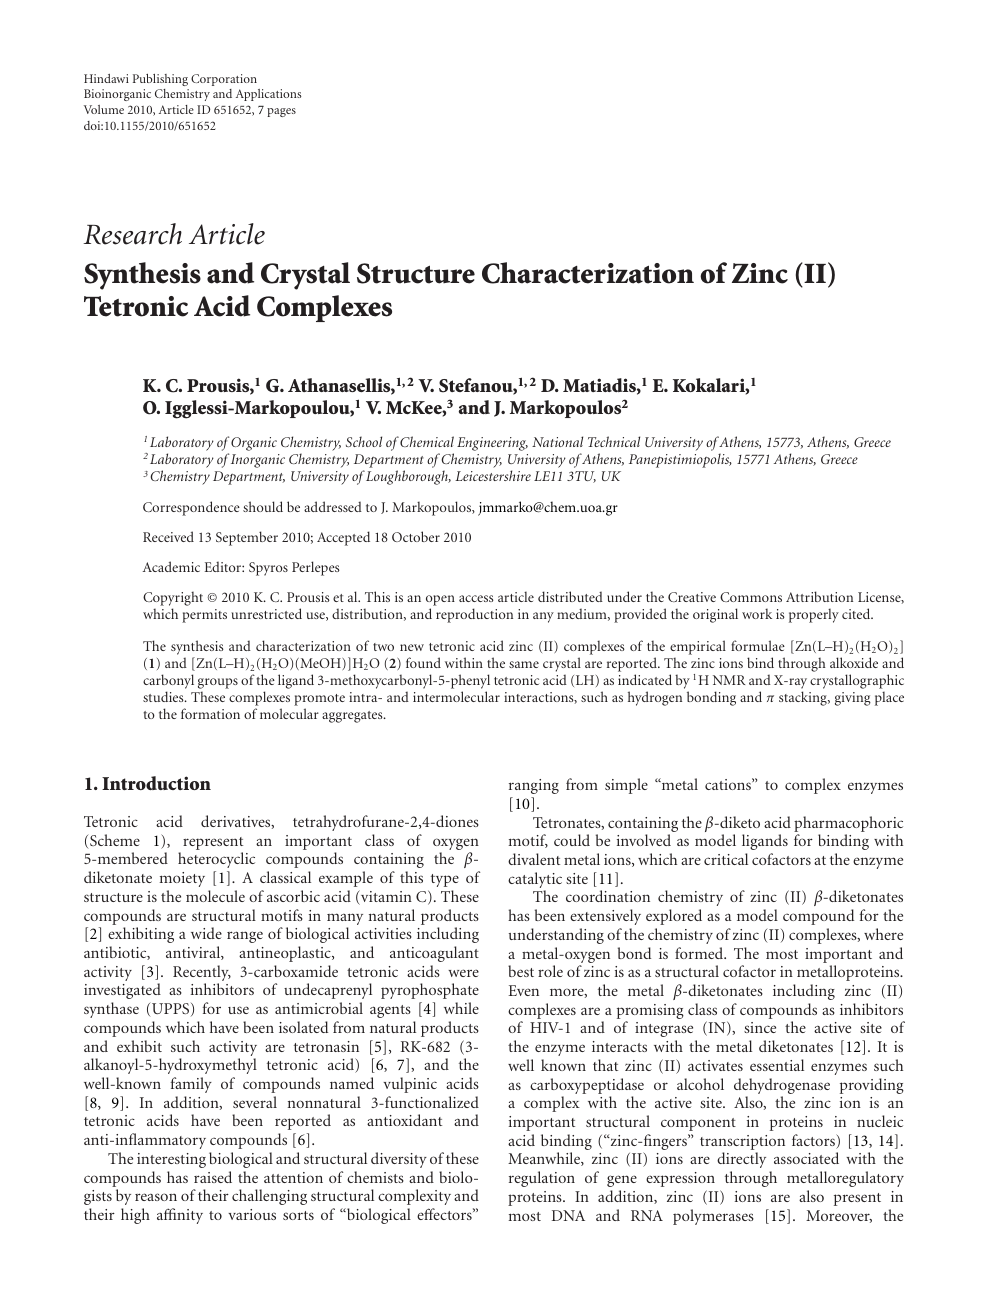 Synthesis And Crystal Structure Characterization Of Zinc Ii Tetronic Acid Complexes Topic Of Research Paper In Chemical Sciences Download Scholarly Article Pdf And Read For Free On Cyberleninka Open Science Hub